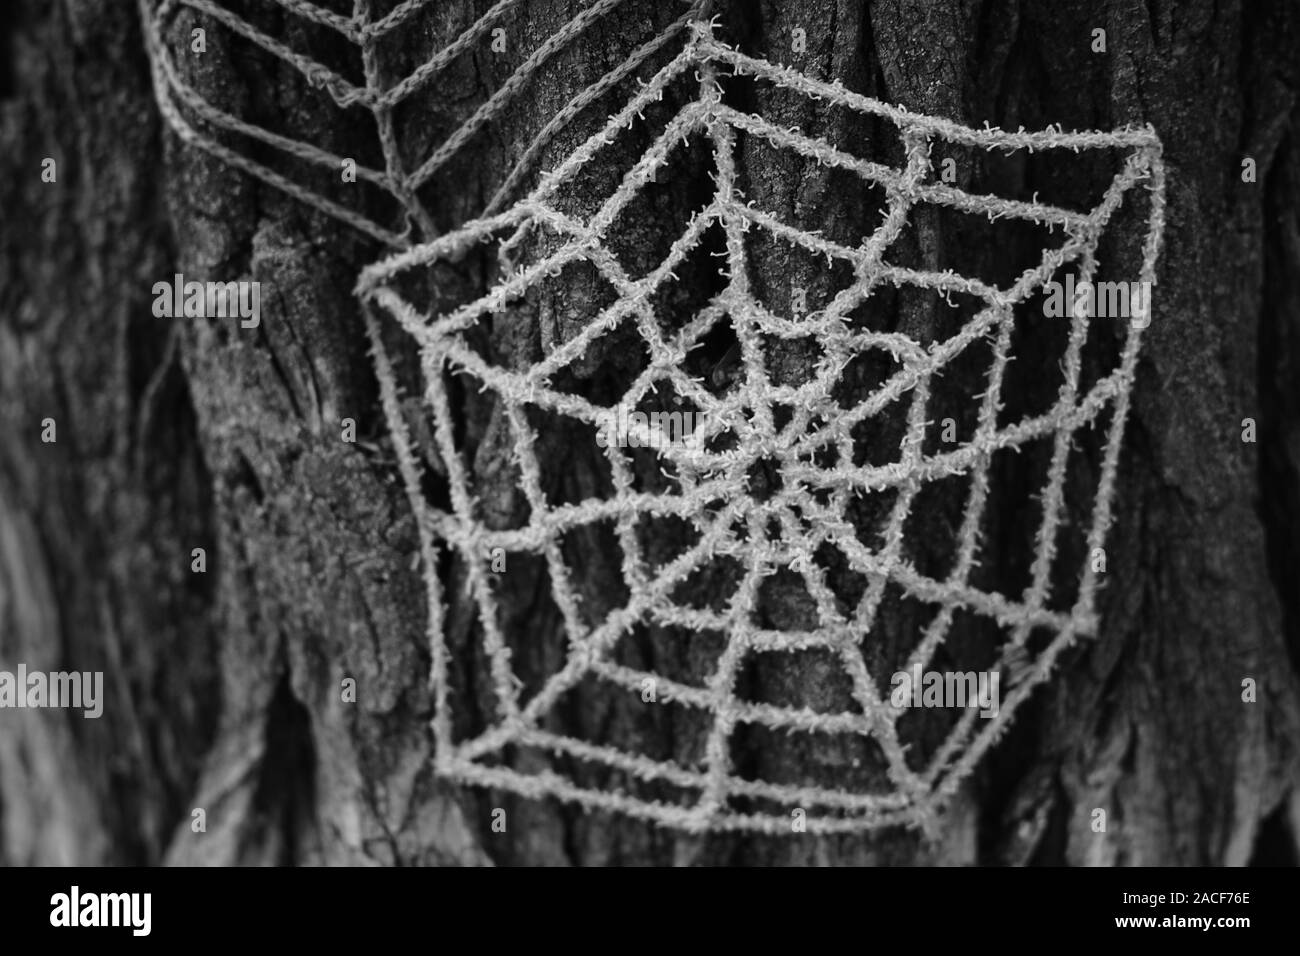 Spider web knitted from threads on a tree trunk, bw photo. Stock Photo